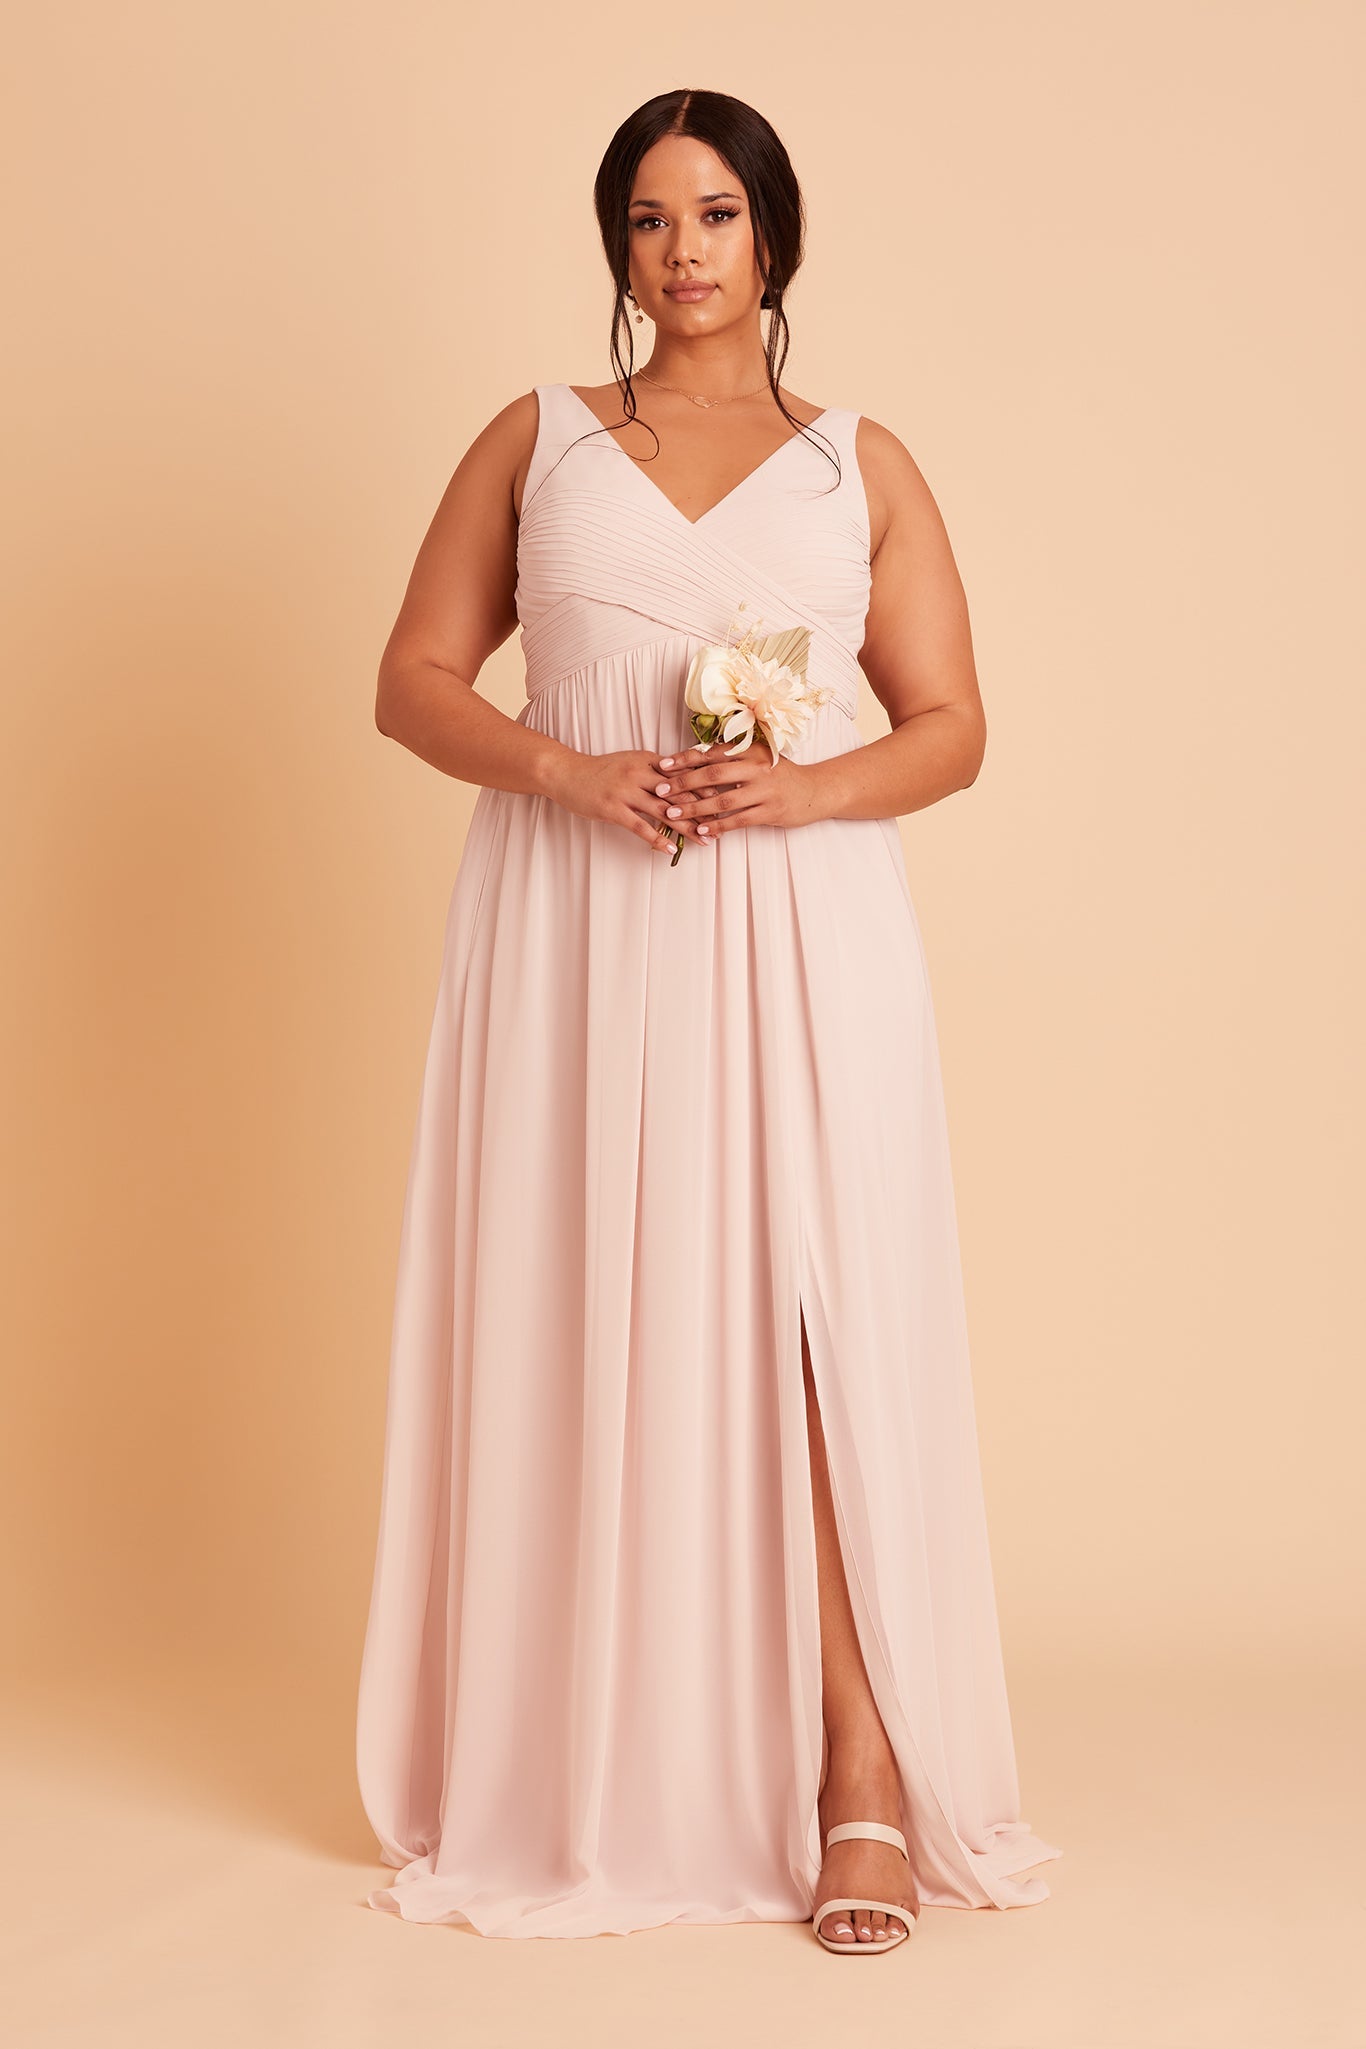 Plus Size Blush Bridesmaid Dresses From $99